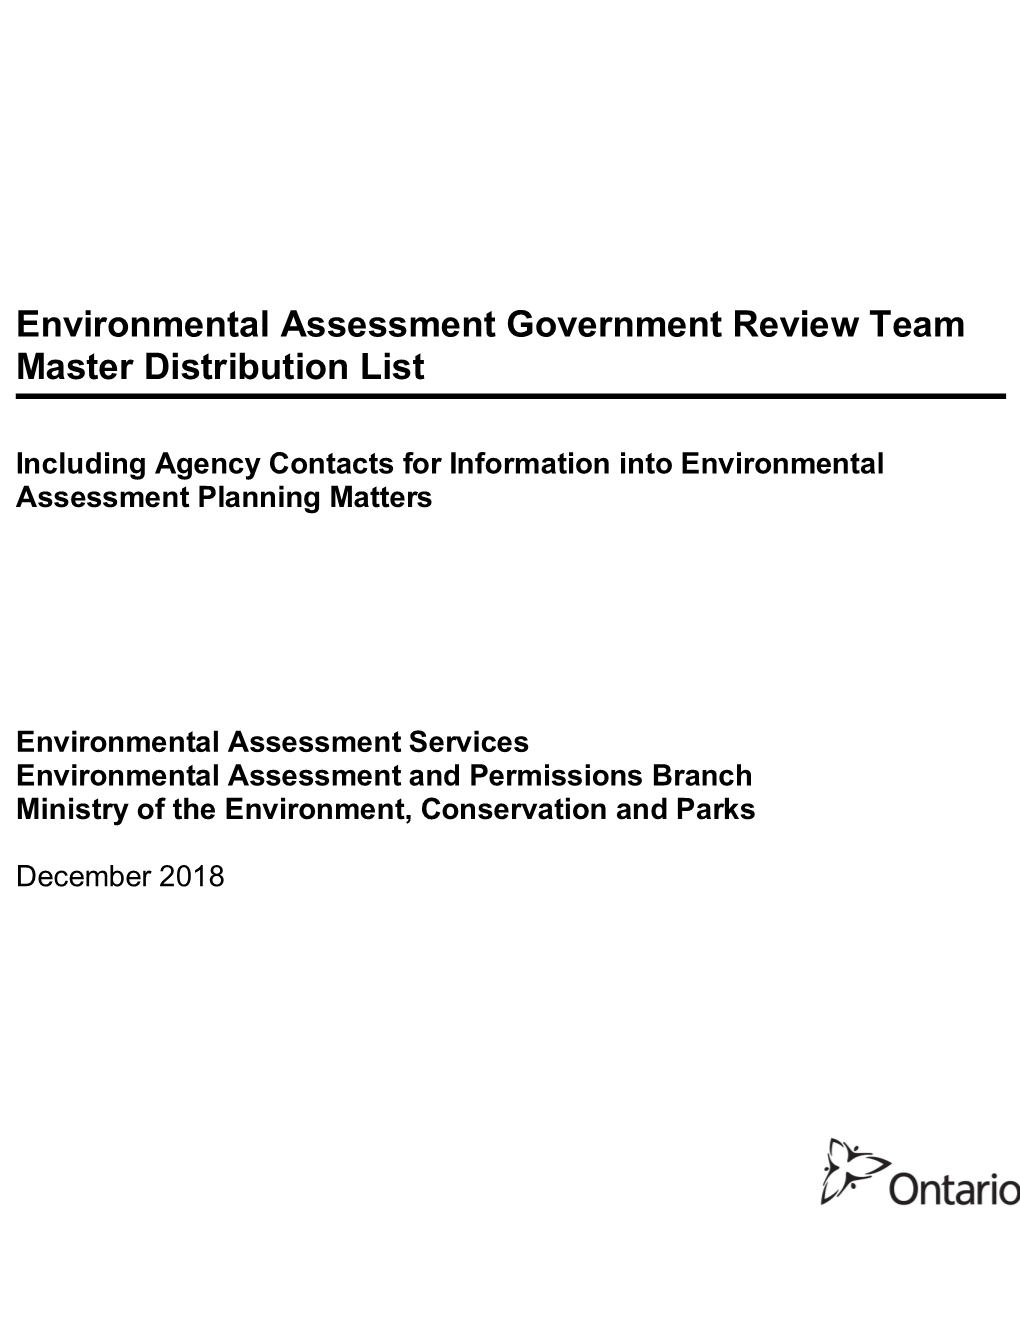 Environmental Assessment Government Review Team Master Distribution List